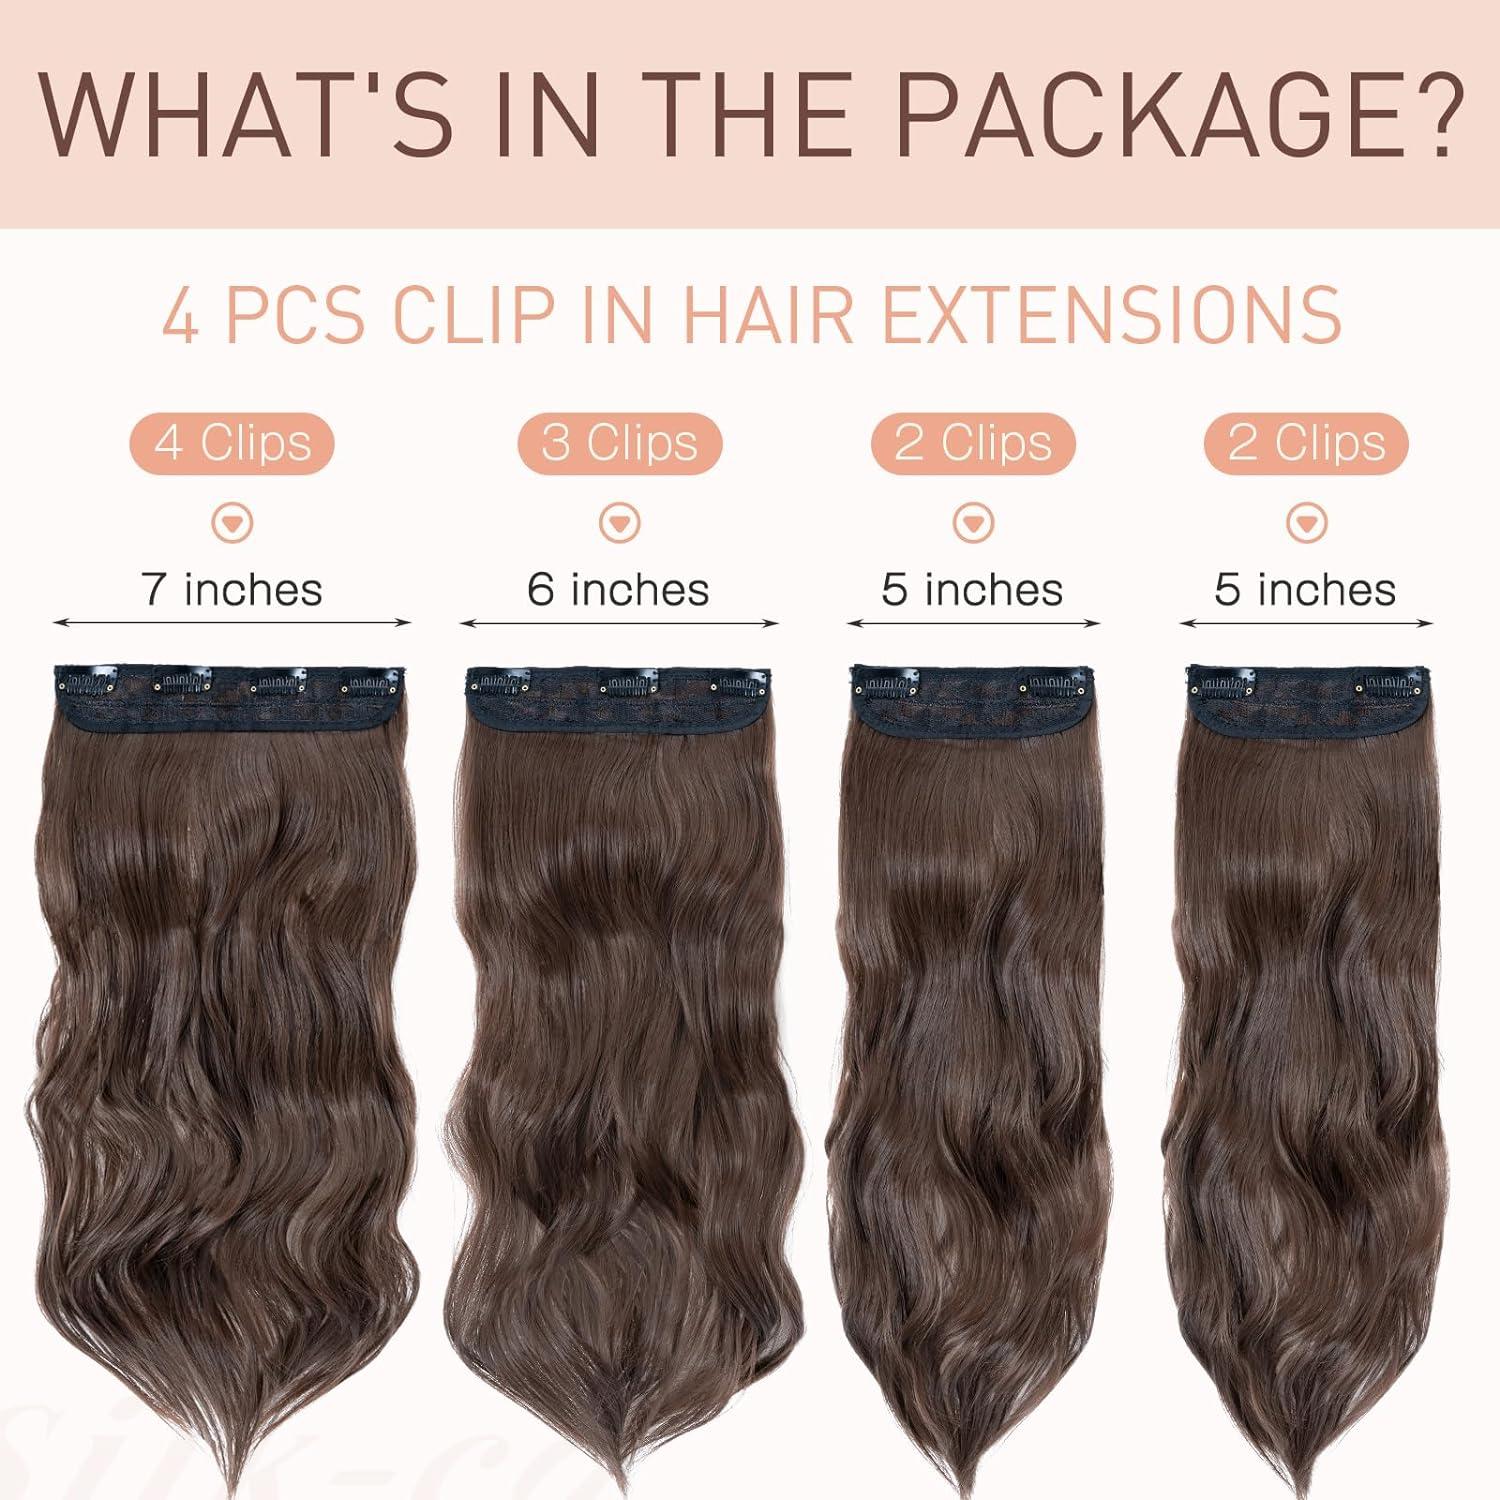 4PCS-11Clips Hair Extensions Clip in Curly Synthetic Clip in Hair Extension  Fiber Hair Pieces 22 Inches Long Hair Clip in Extensions for Women Wavy Hair  Pieces for Full Head-Curly #Chestnut Brown 22